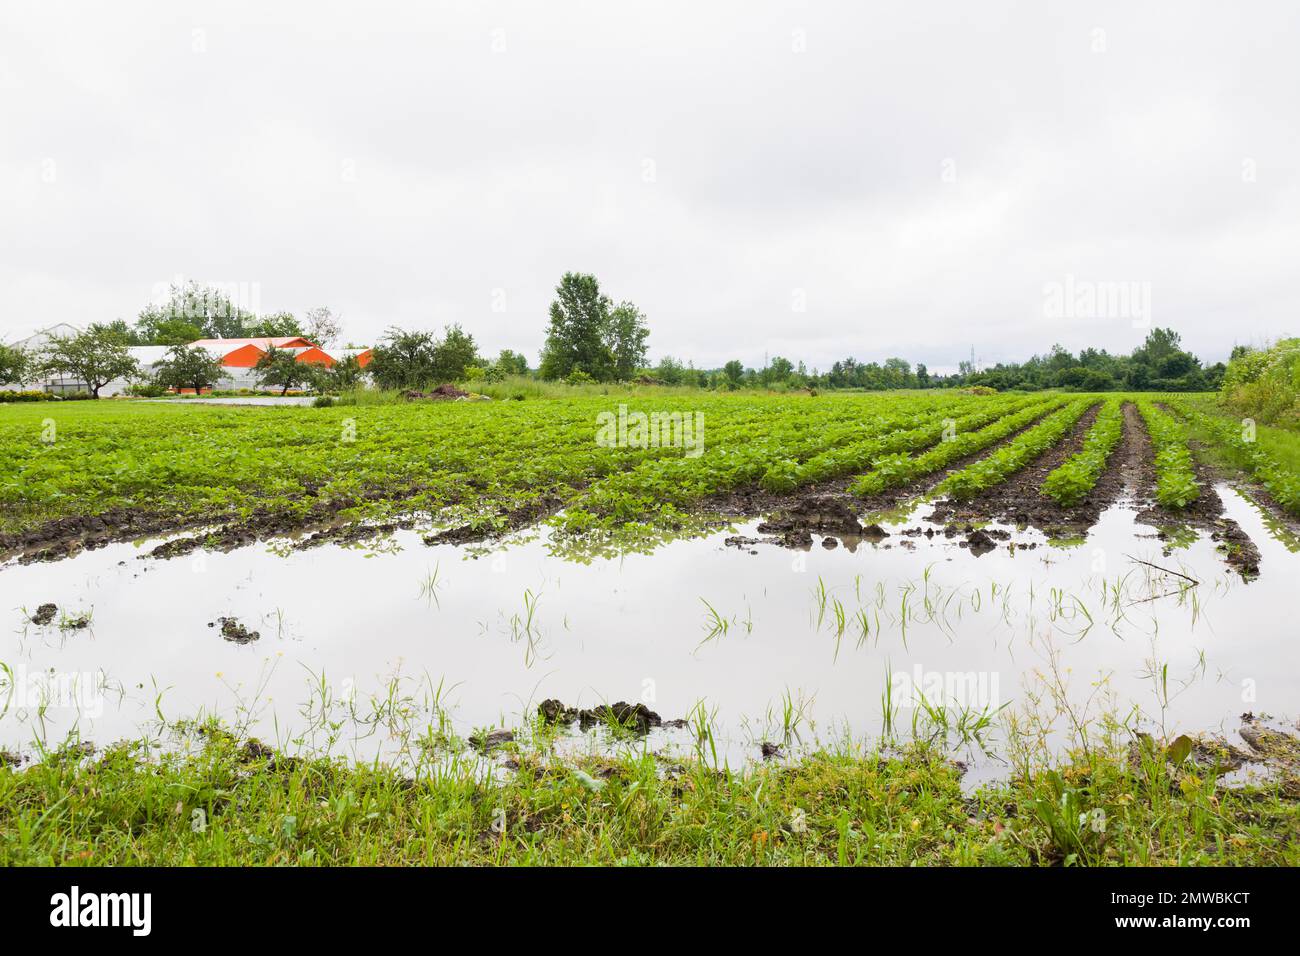 Agricultural crop field flooded with excess rain water due to the effects of climate change. Stock Photo